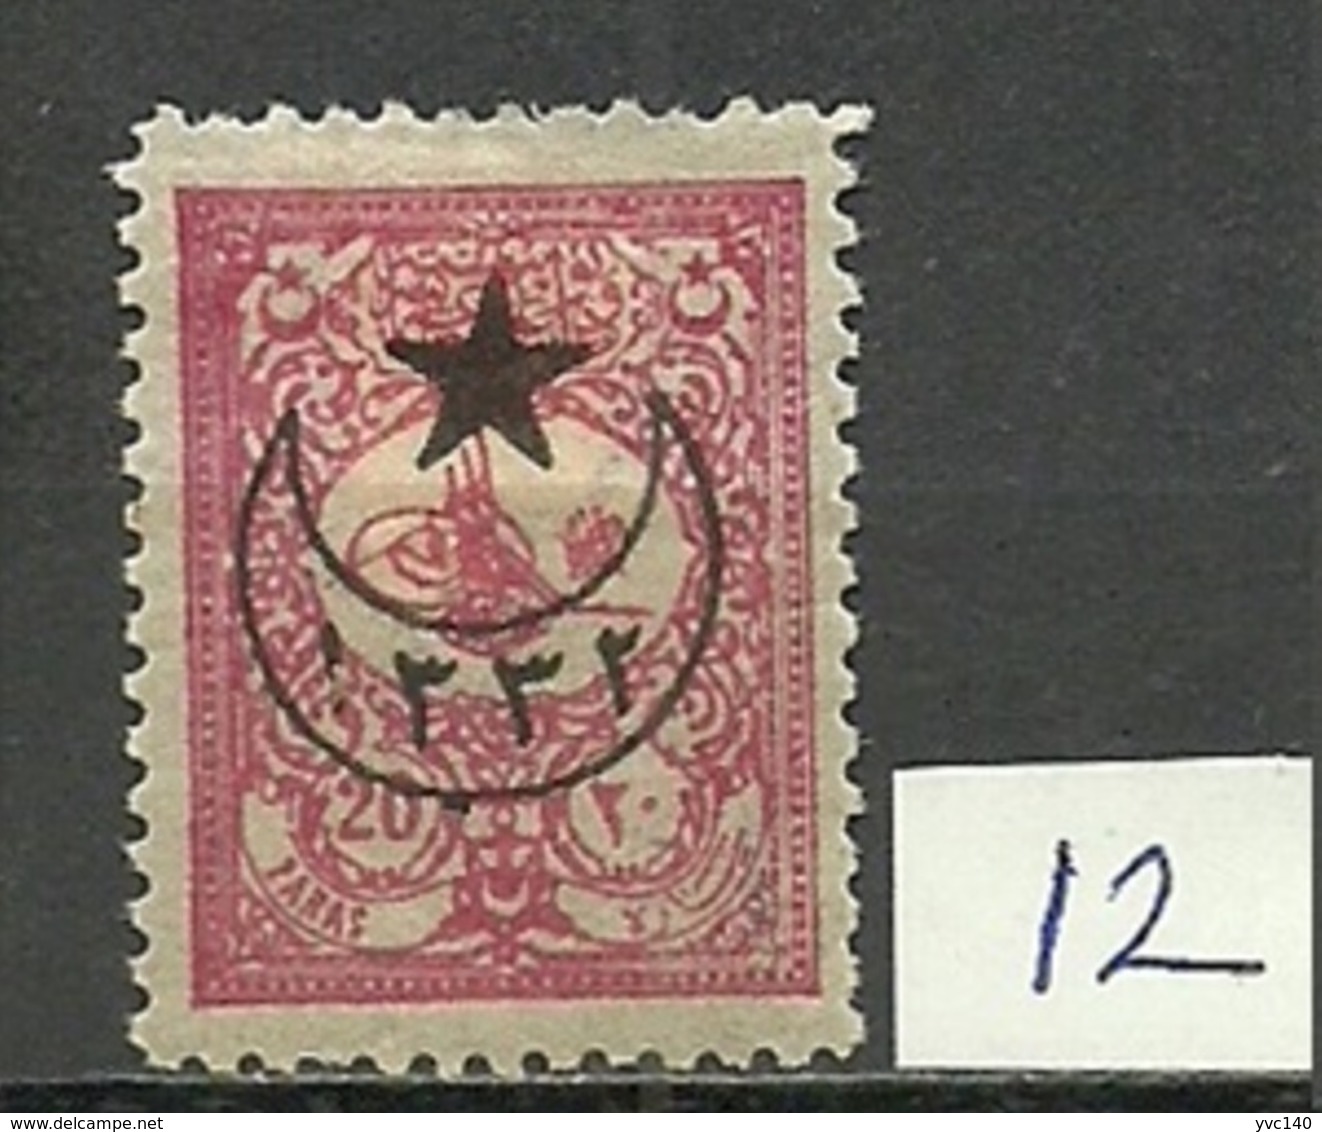 Turkey; 1916 Overprinted War Issue Stamp 20 P. "12 Perf. Instead Of 13 1/2" (Signed) - Unused Stamps